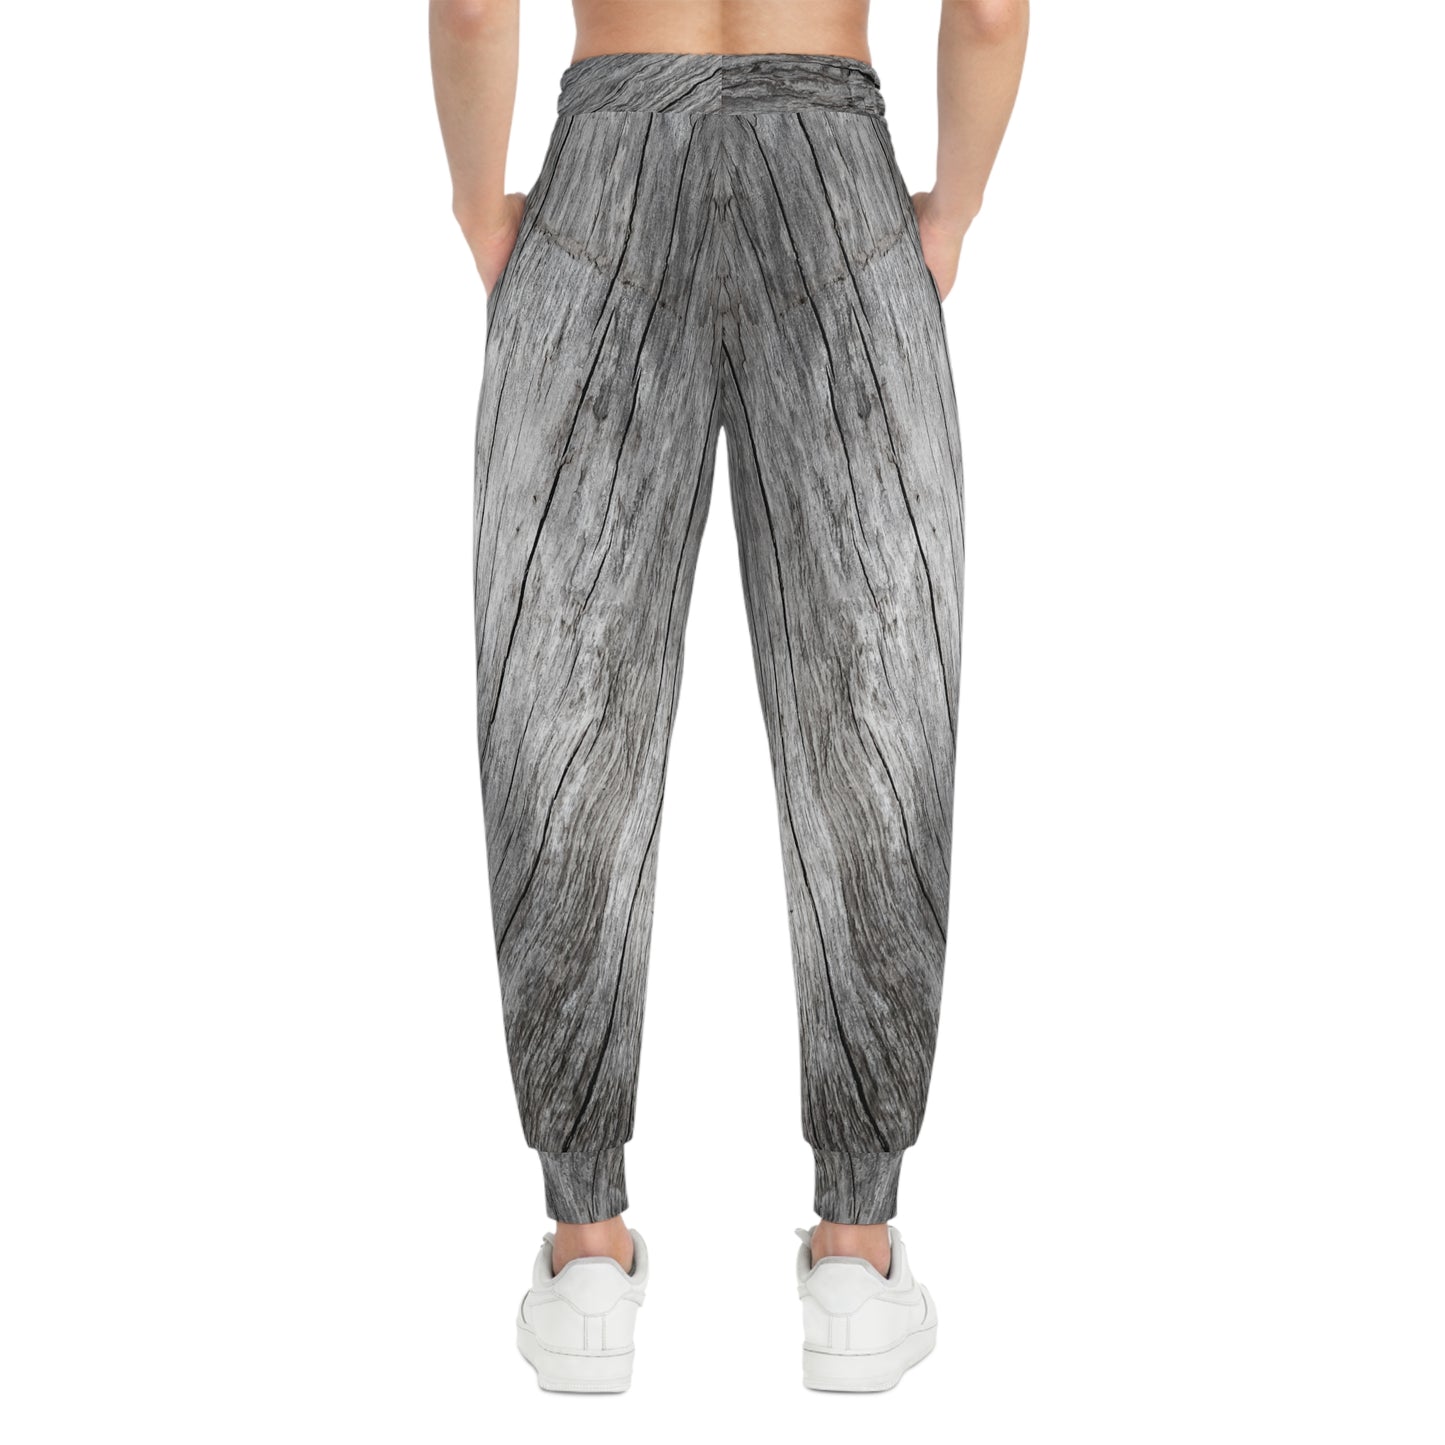 Athletic Joggers For Women | The Wood